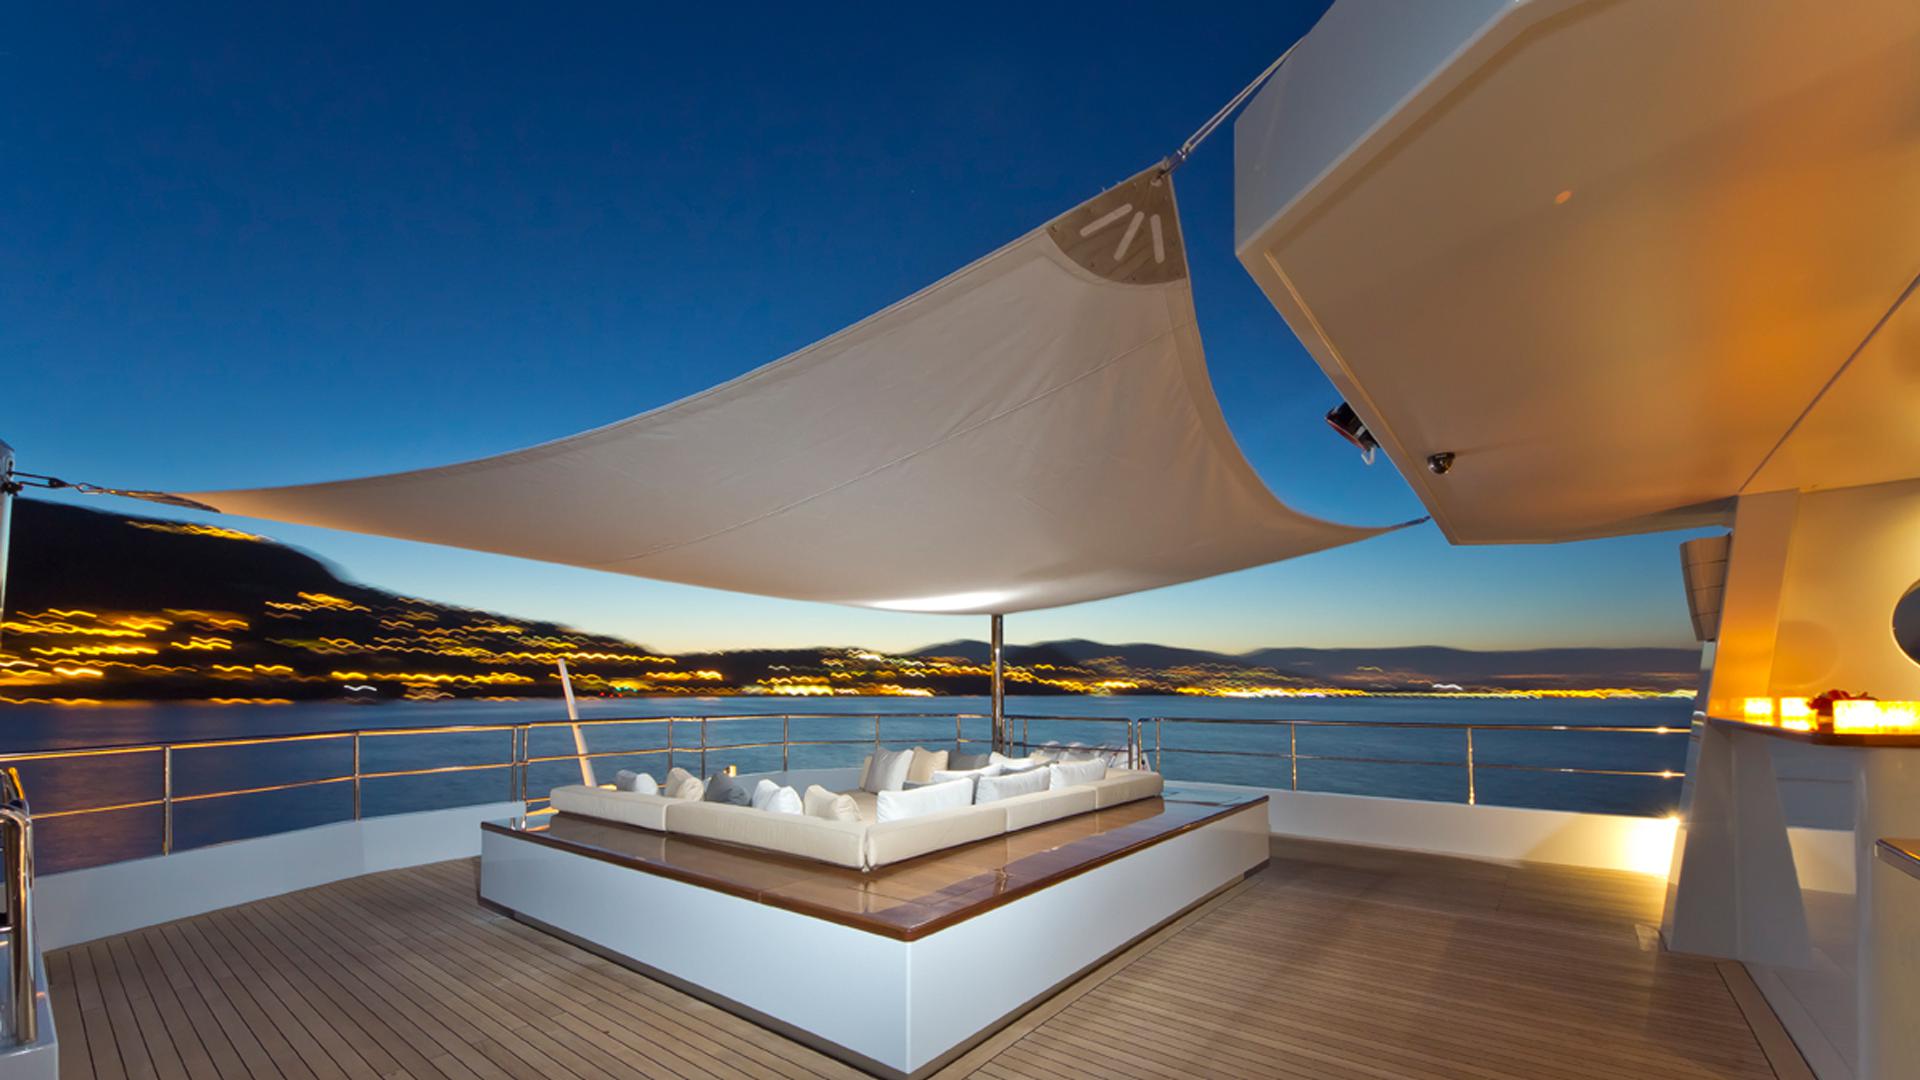 Motor Yacht Preference - outdoor seating. Photo credit Tansu Yachts